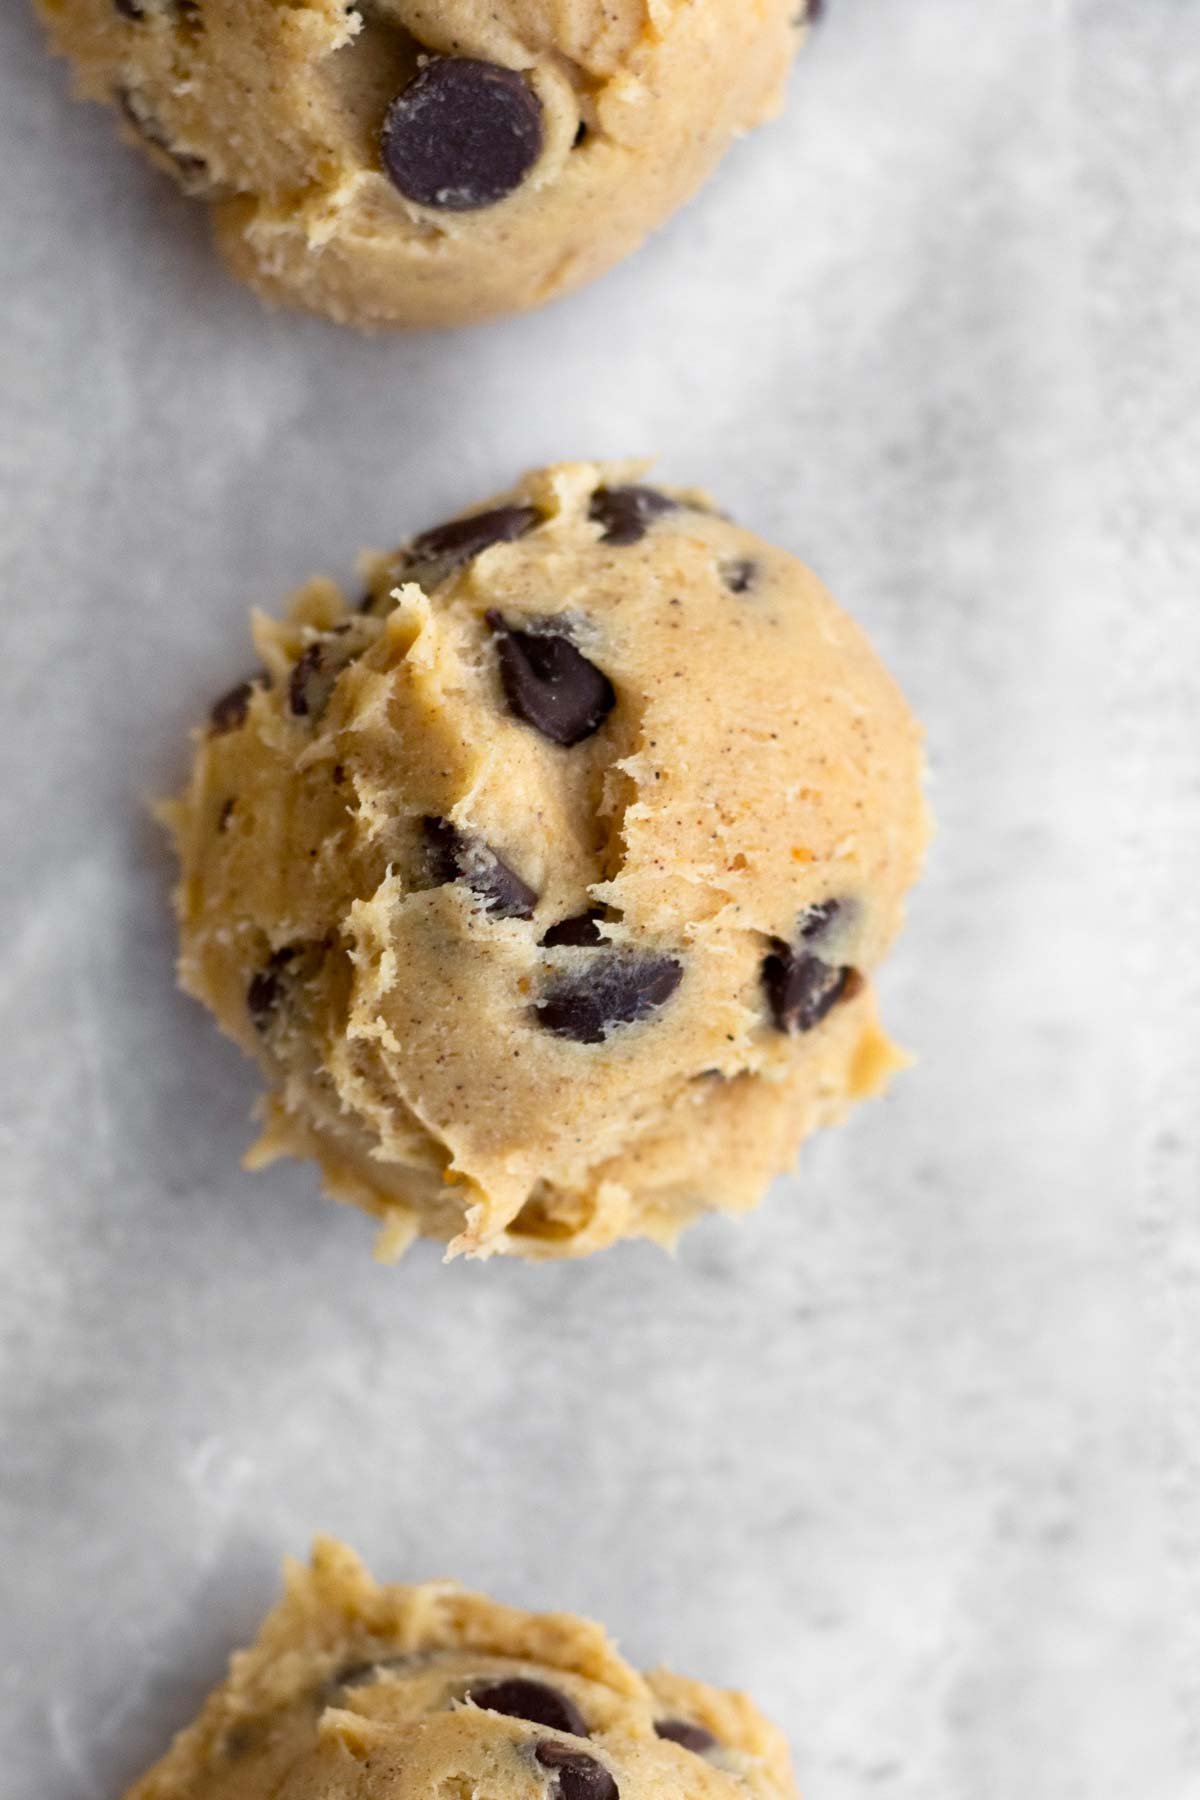 Scoops of cookie dough.